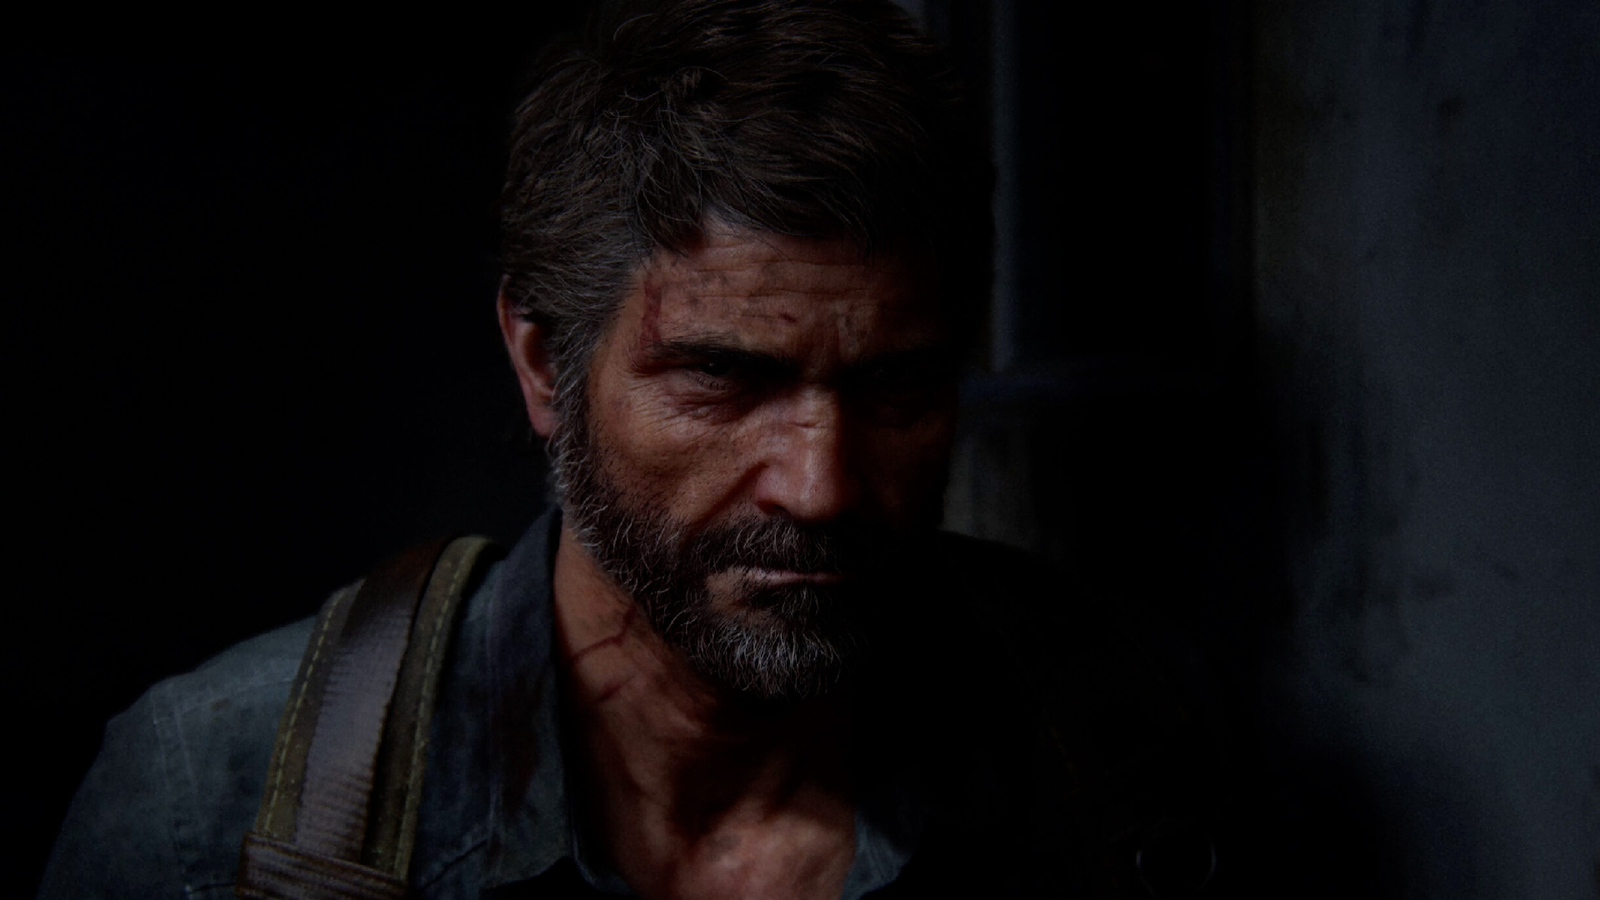 The Last of Us Part 2 PS5 Upgrade: How to Upgrade from the PS4 Version